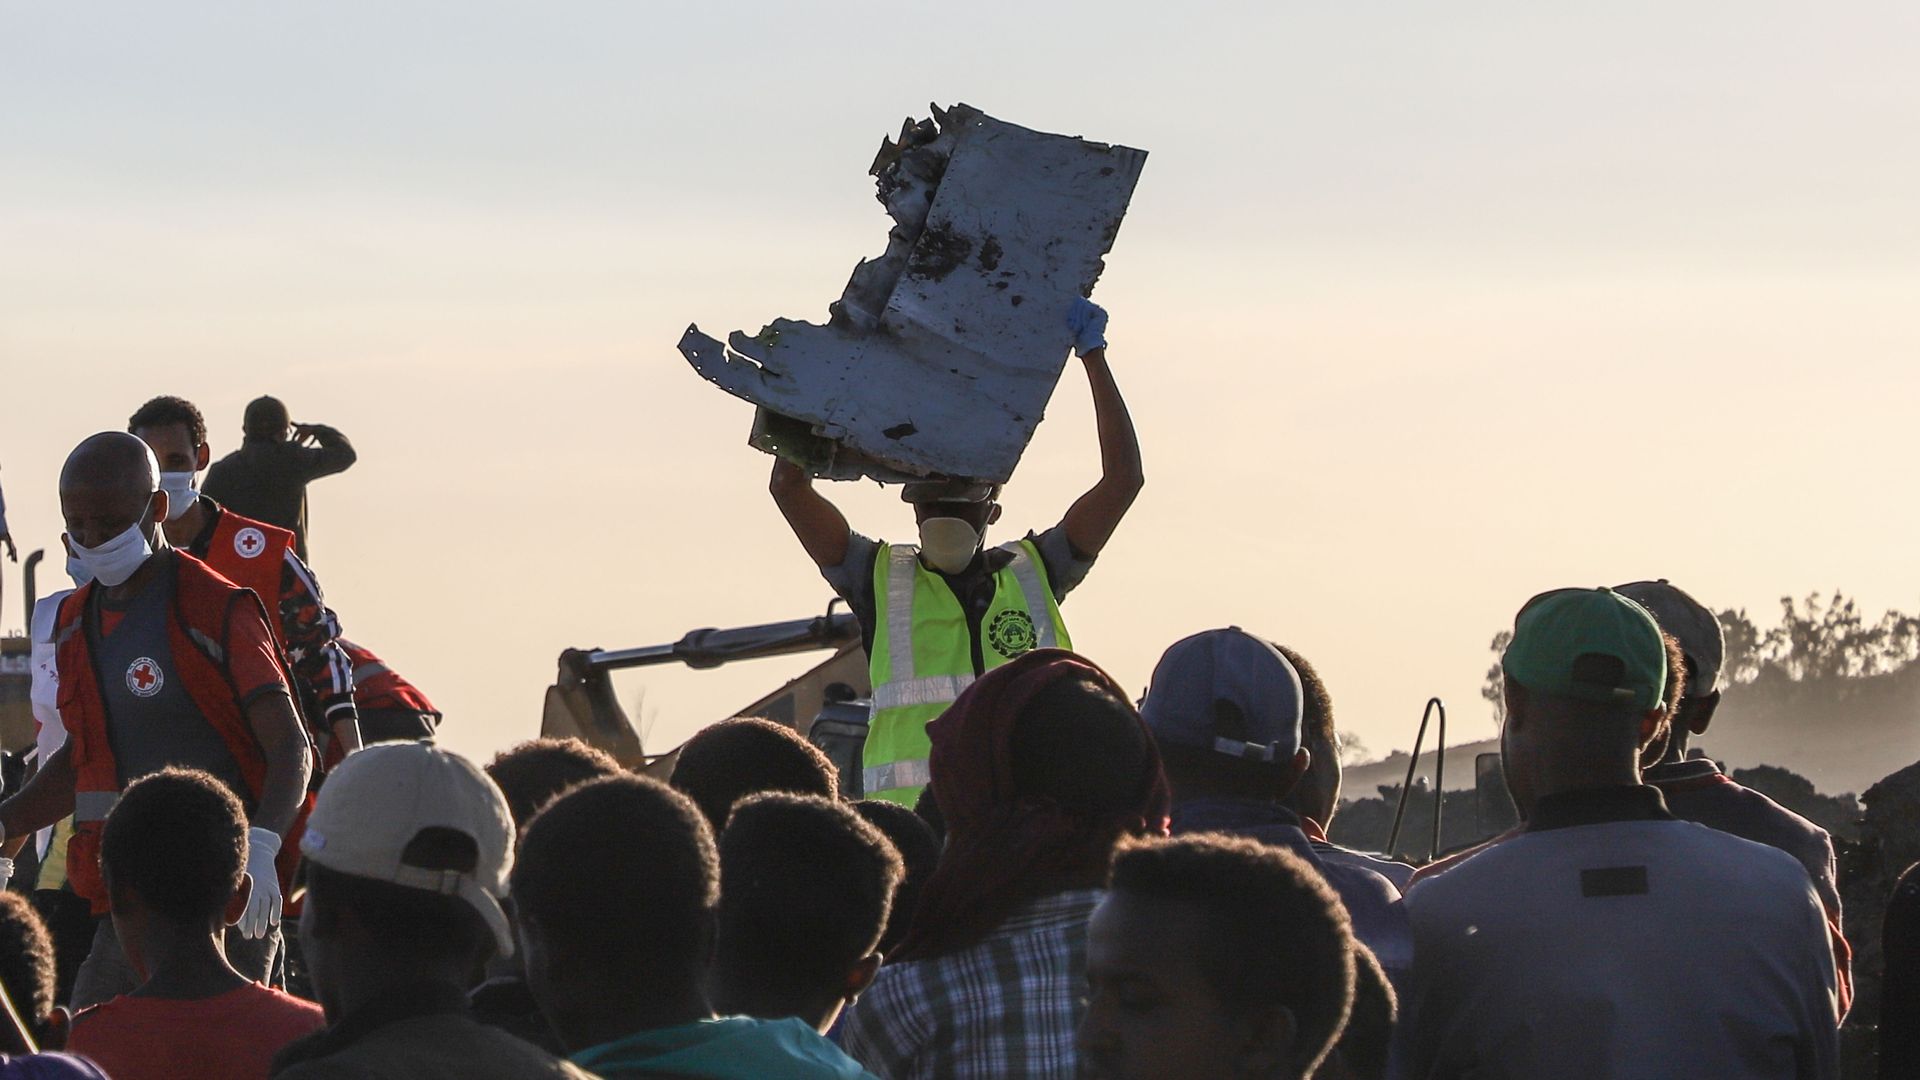 Wreckage from the Ethiopian Airlines crash.